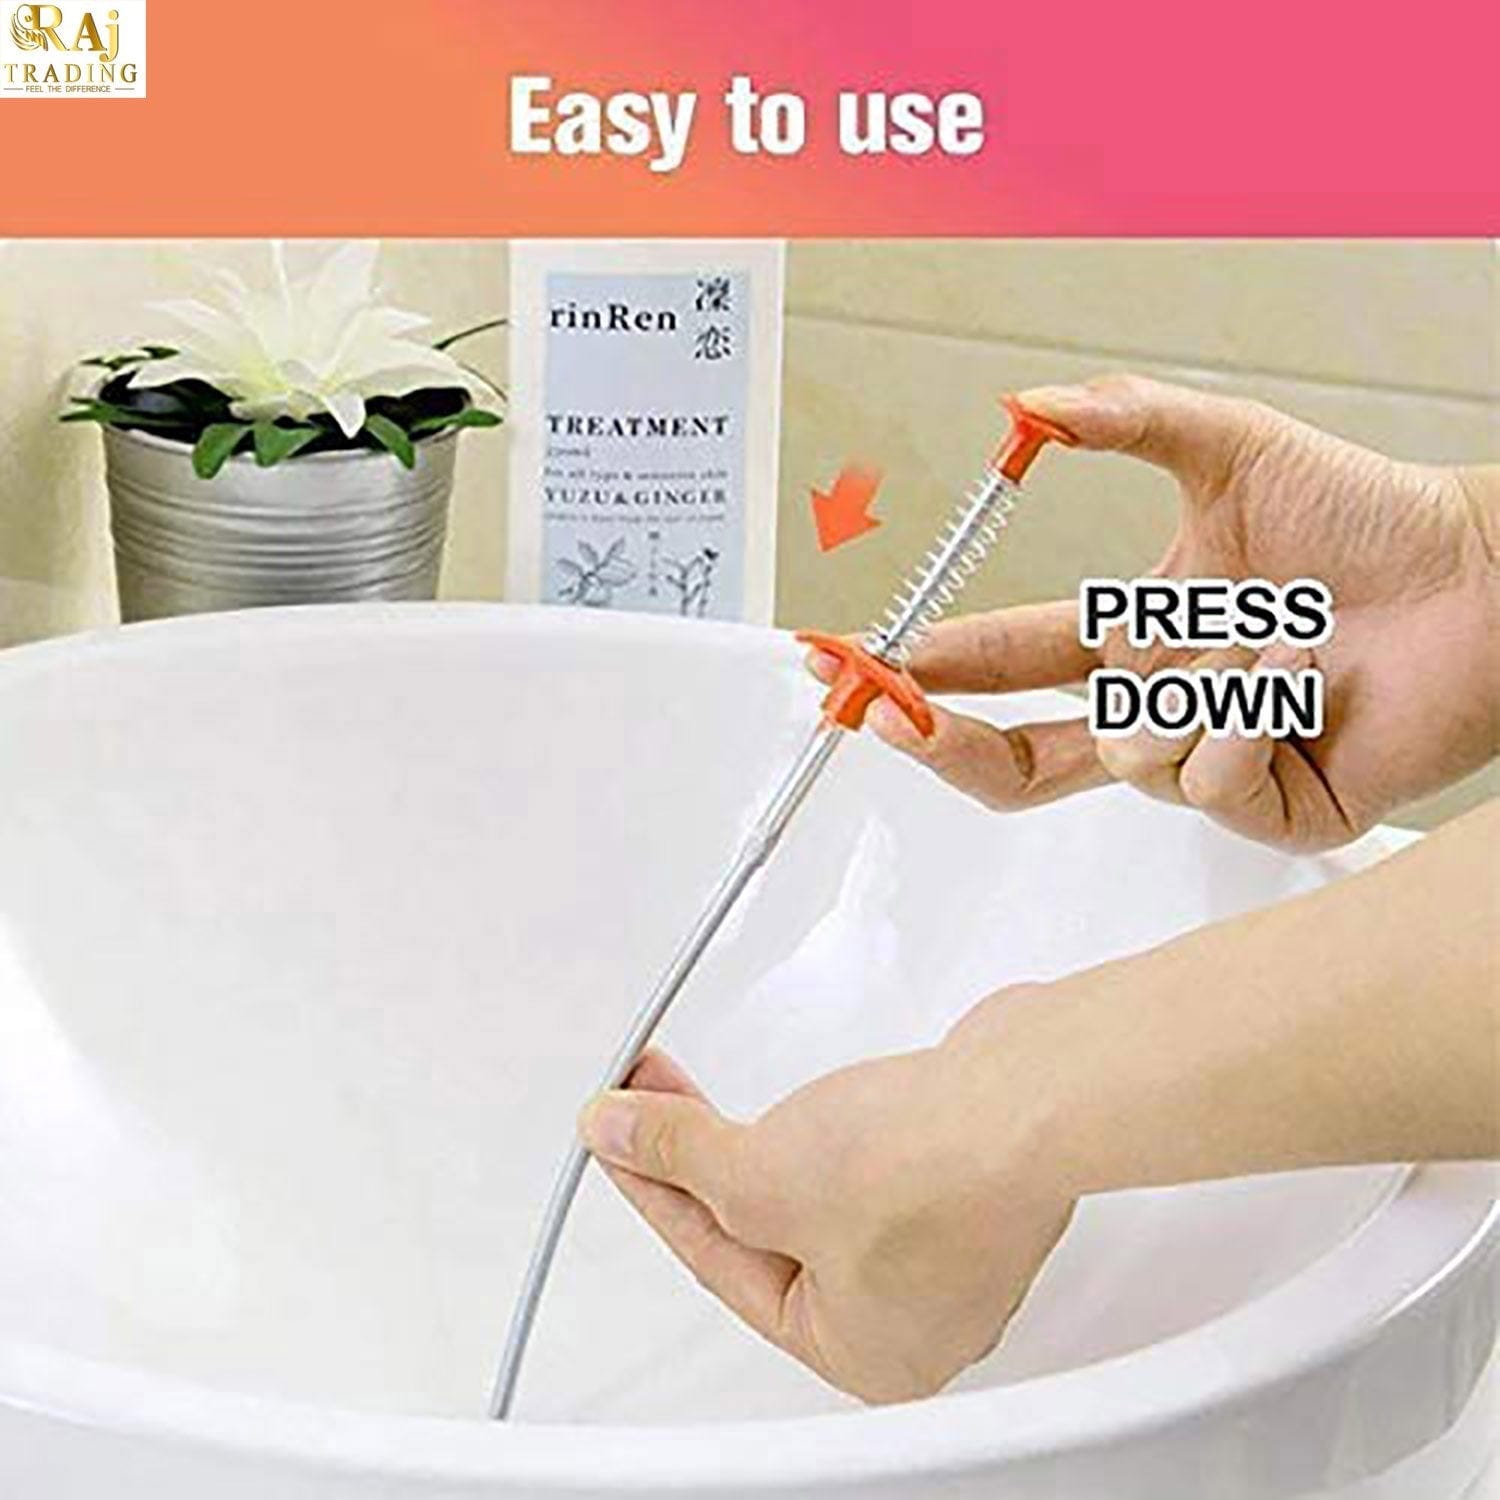 Sewer cleaning hook & No Need For Chemicals Zaavio®